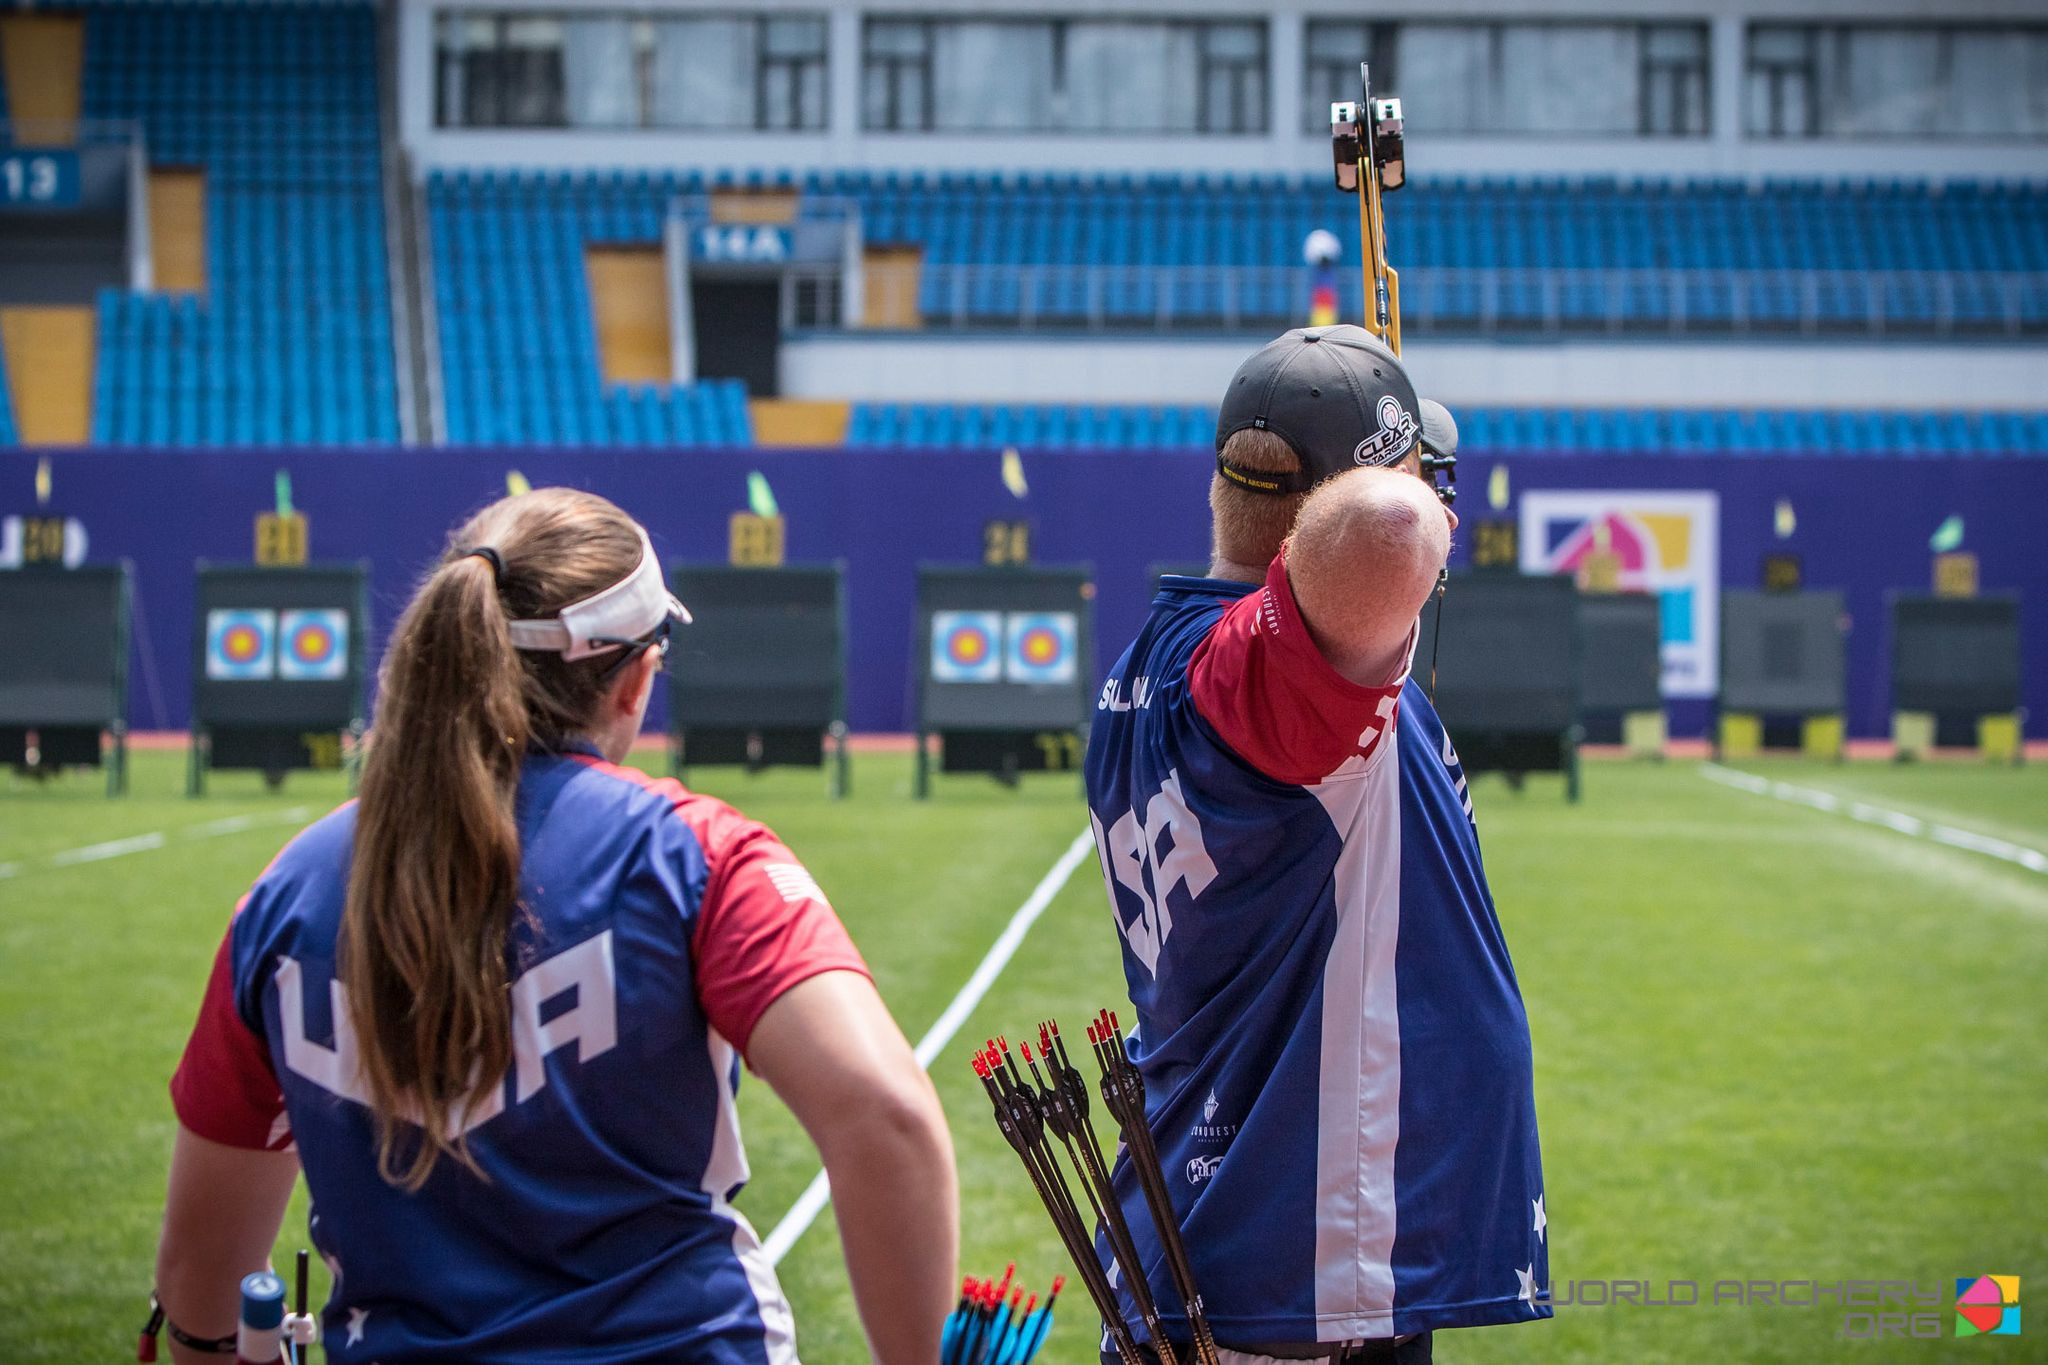 United States pairing Alexis Ruiz and Matt Sullivan will seek a second successive Archery World Cup gold in the compound mixed team event in Shanghai tomorrow ©World Archery